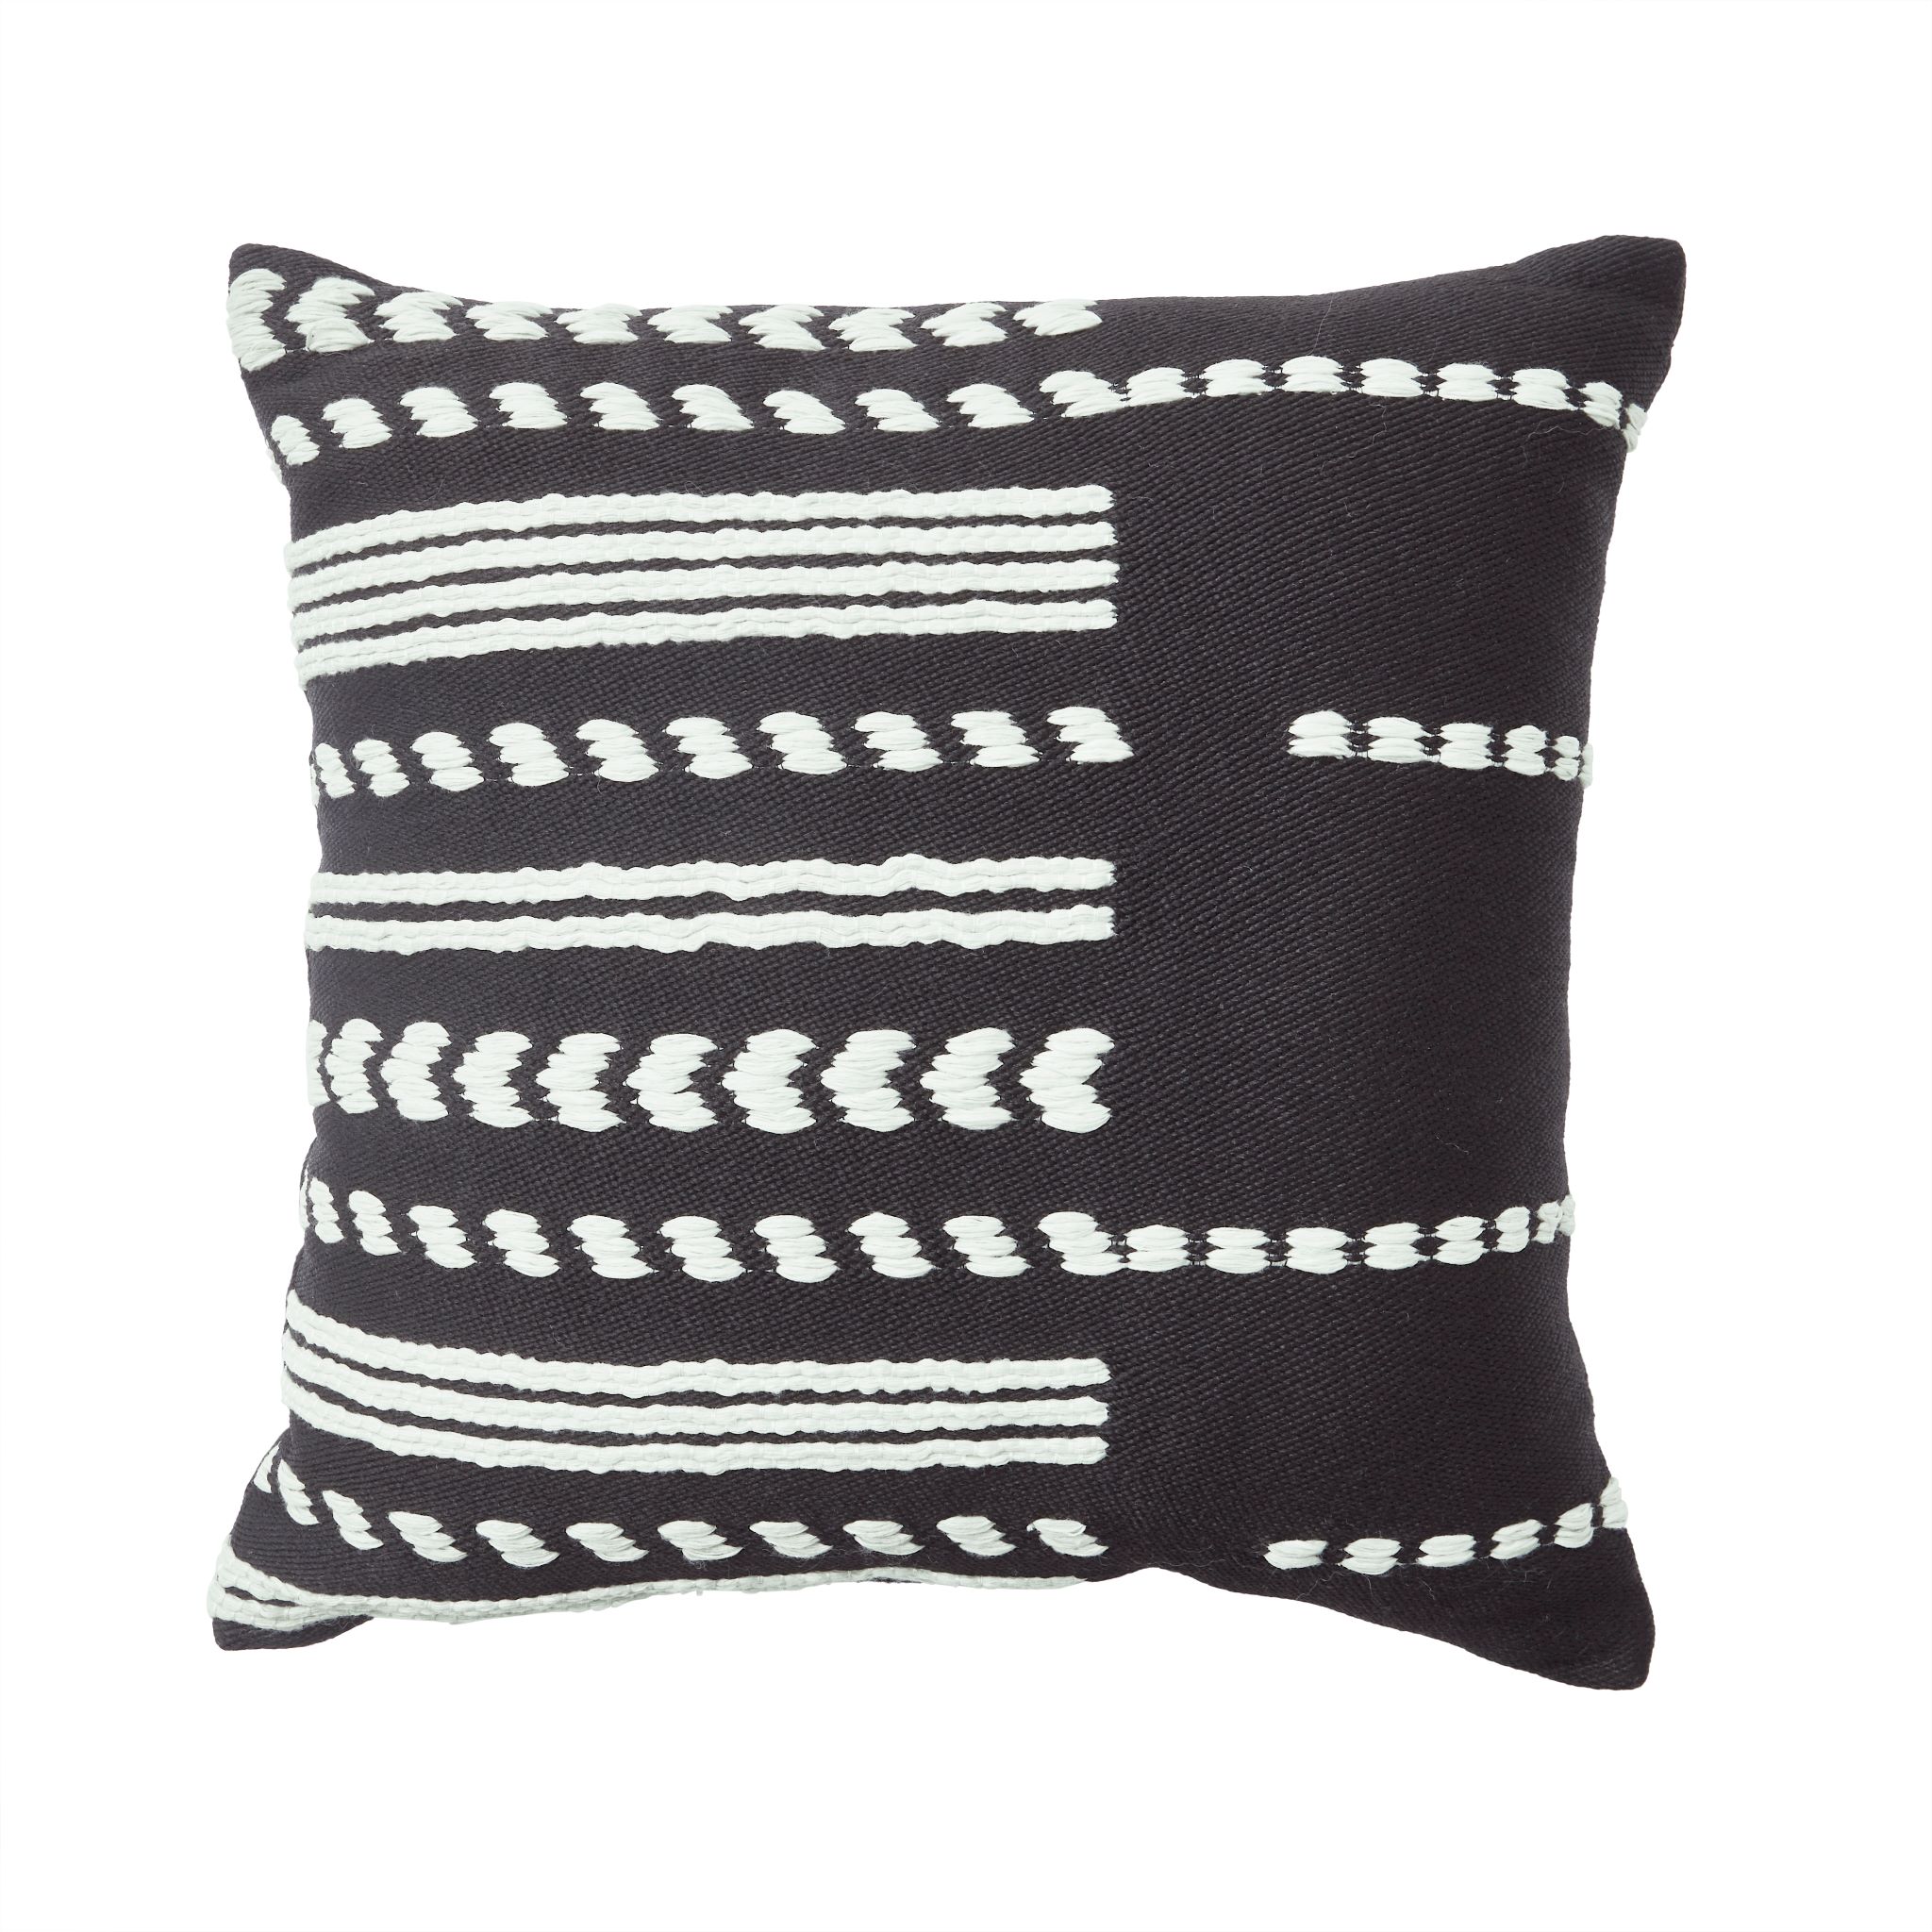 Better Homes & Gardens B&W Stripe Outdoor Throw Pillow, 19" x 19" Square - image 1 of 5